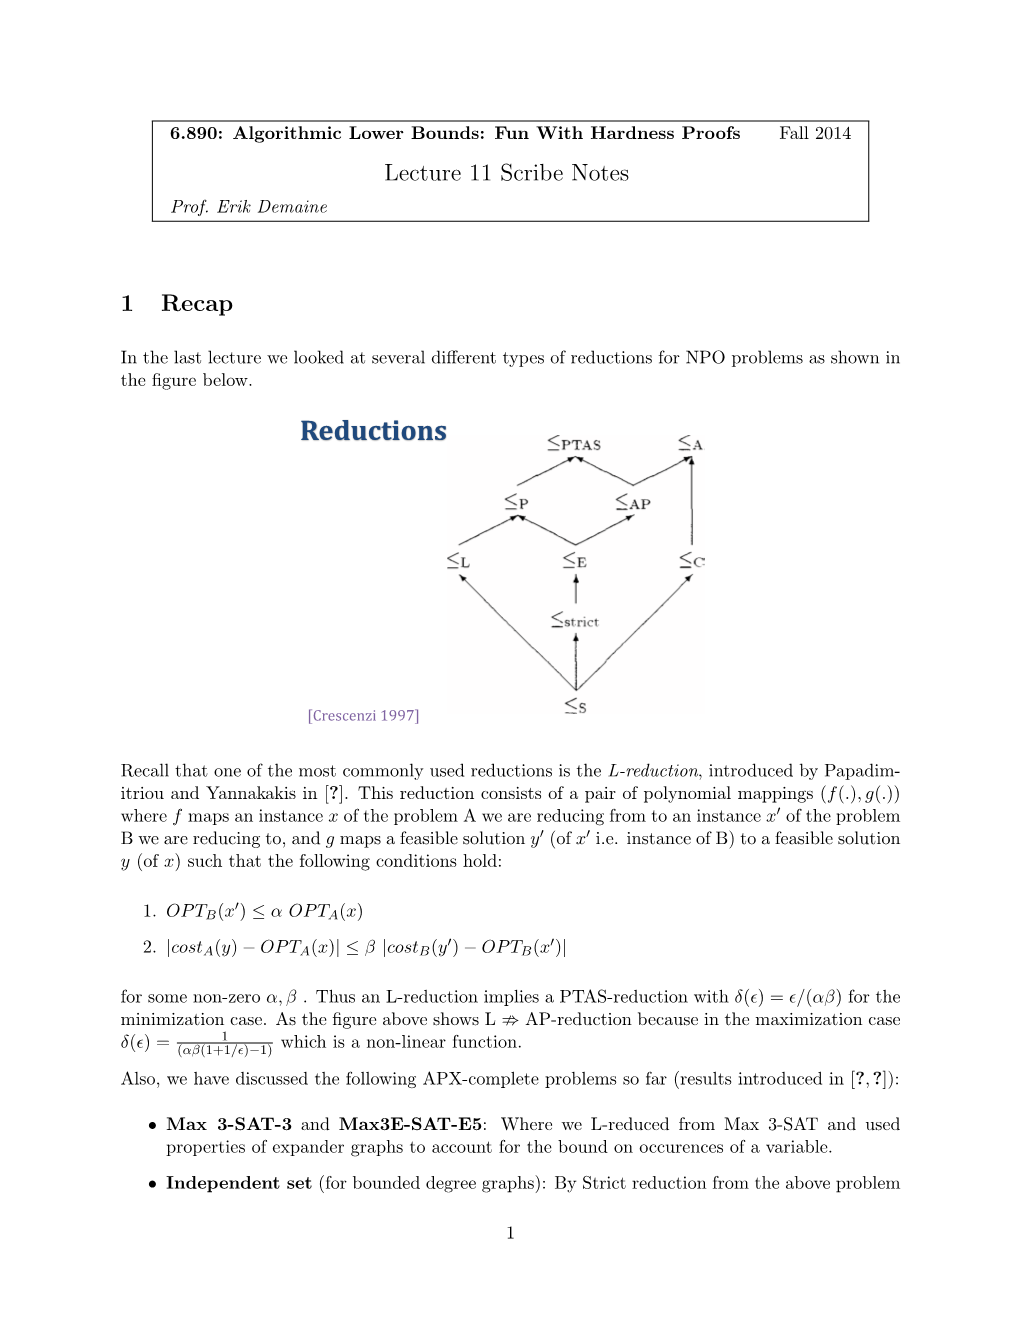 Class on Algorithmic Lower Bounds and Hardness Proofs, Lecture 11